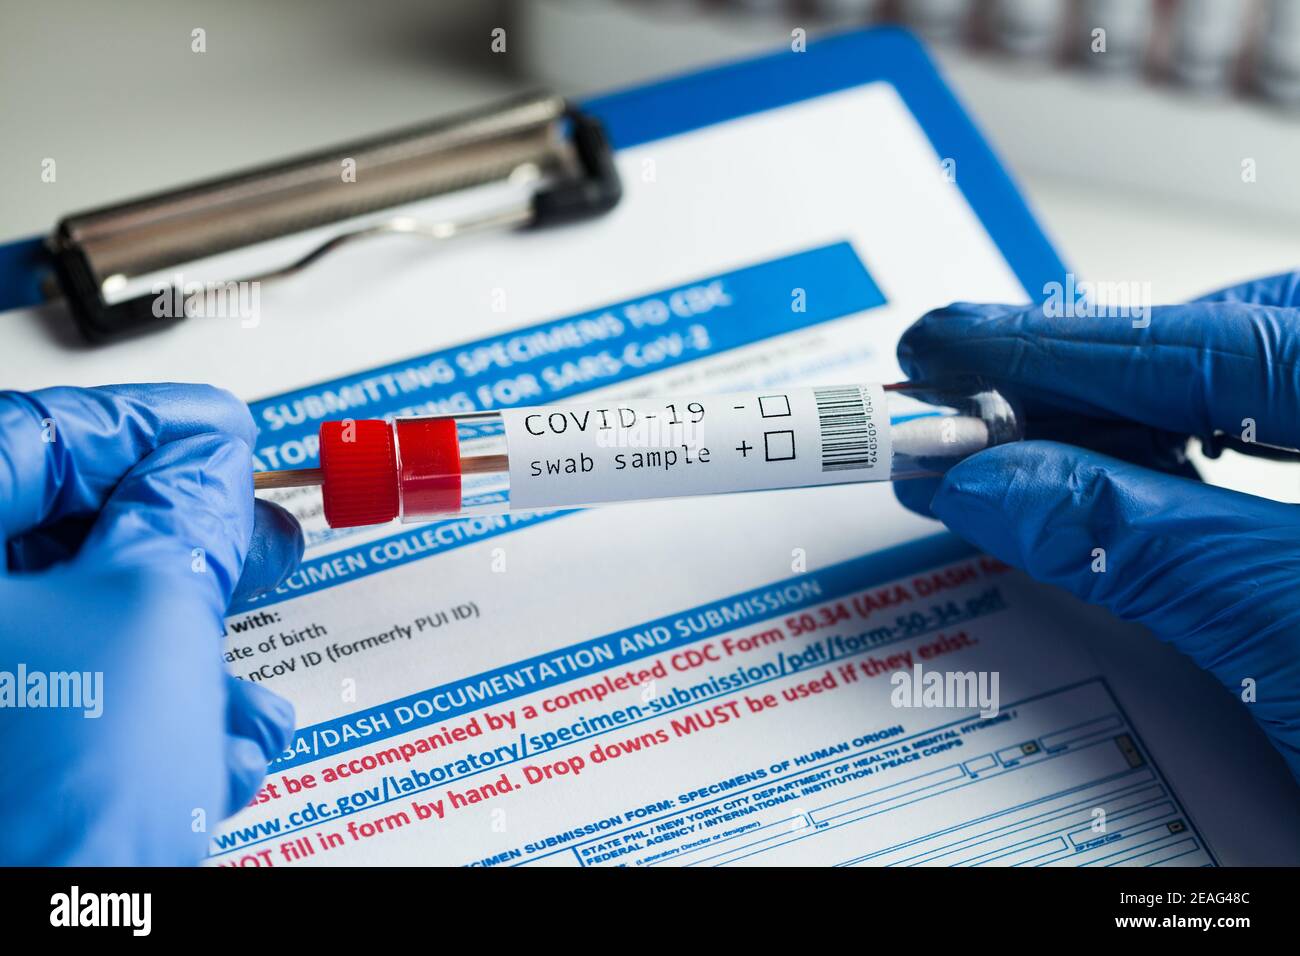 rt-PCR COVID-19 virus disease diagnostic test,lab technician wearing blue protective glove holding test tube with swabbing stick,swab sample equipment Stock Photo